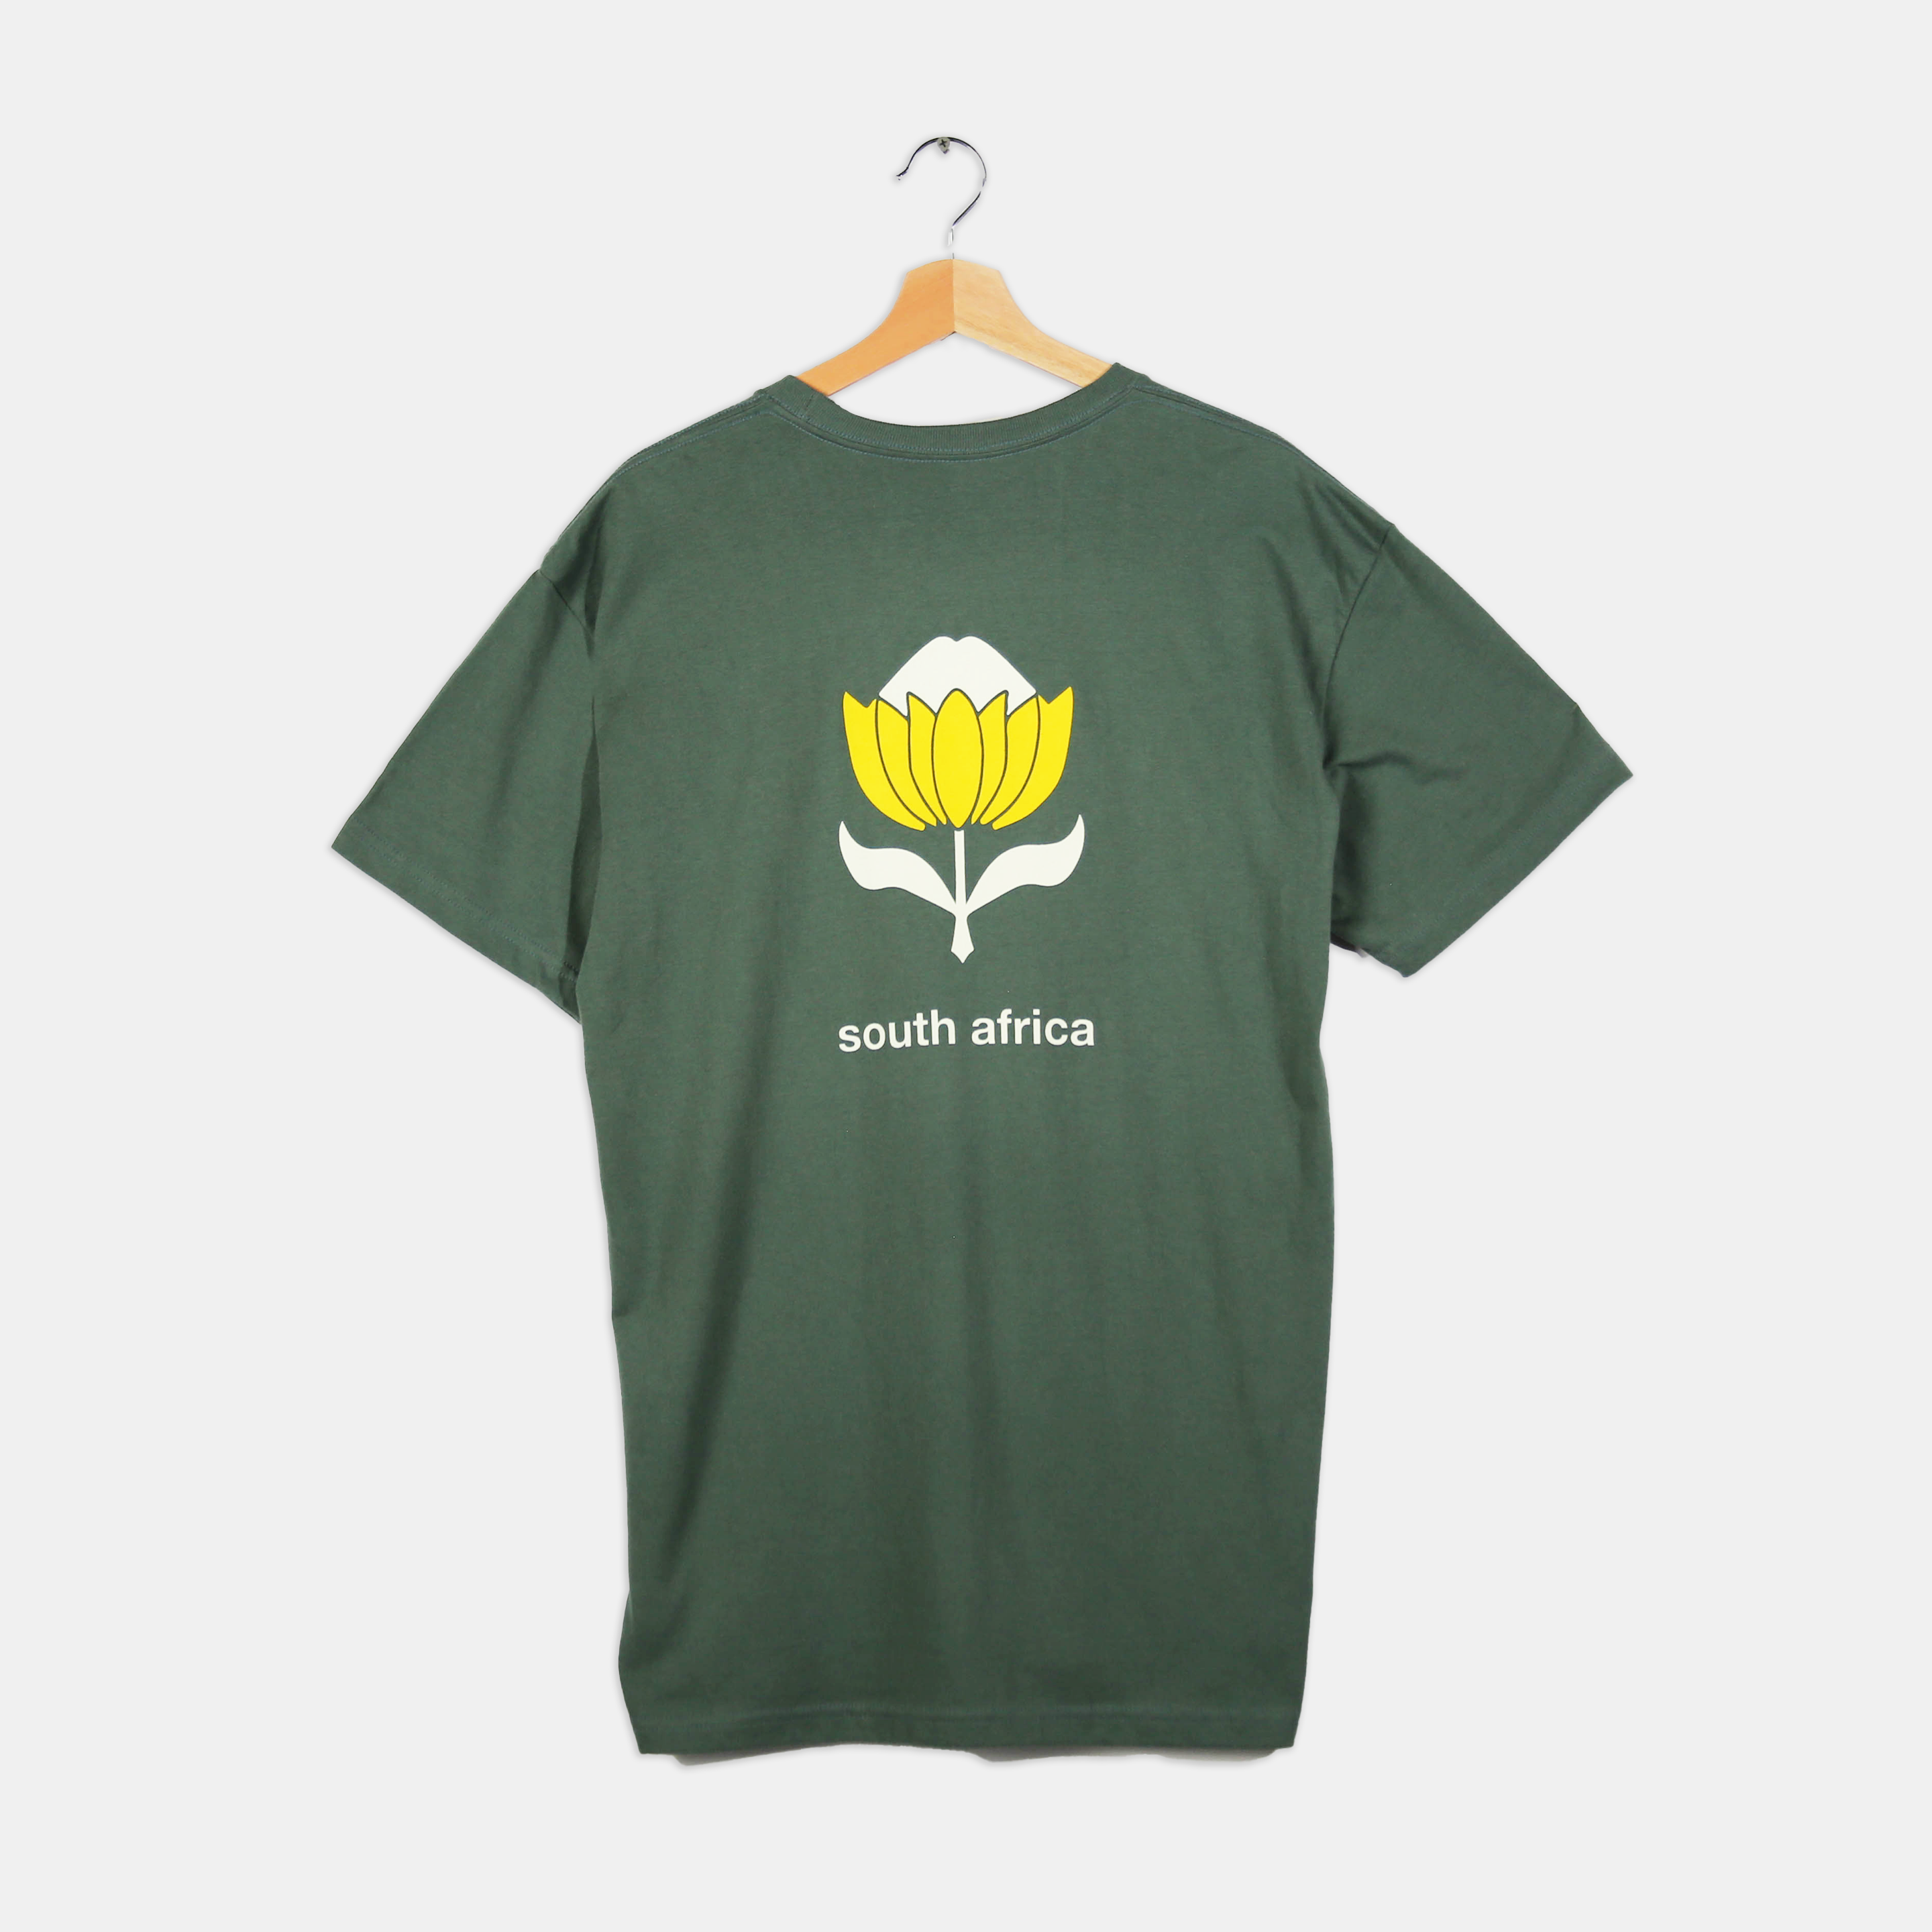 "Unofficial" South Africa Tee